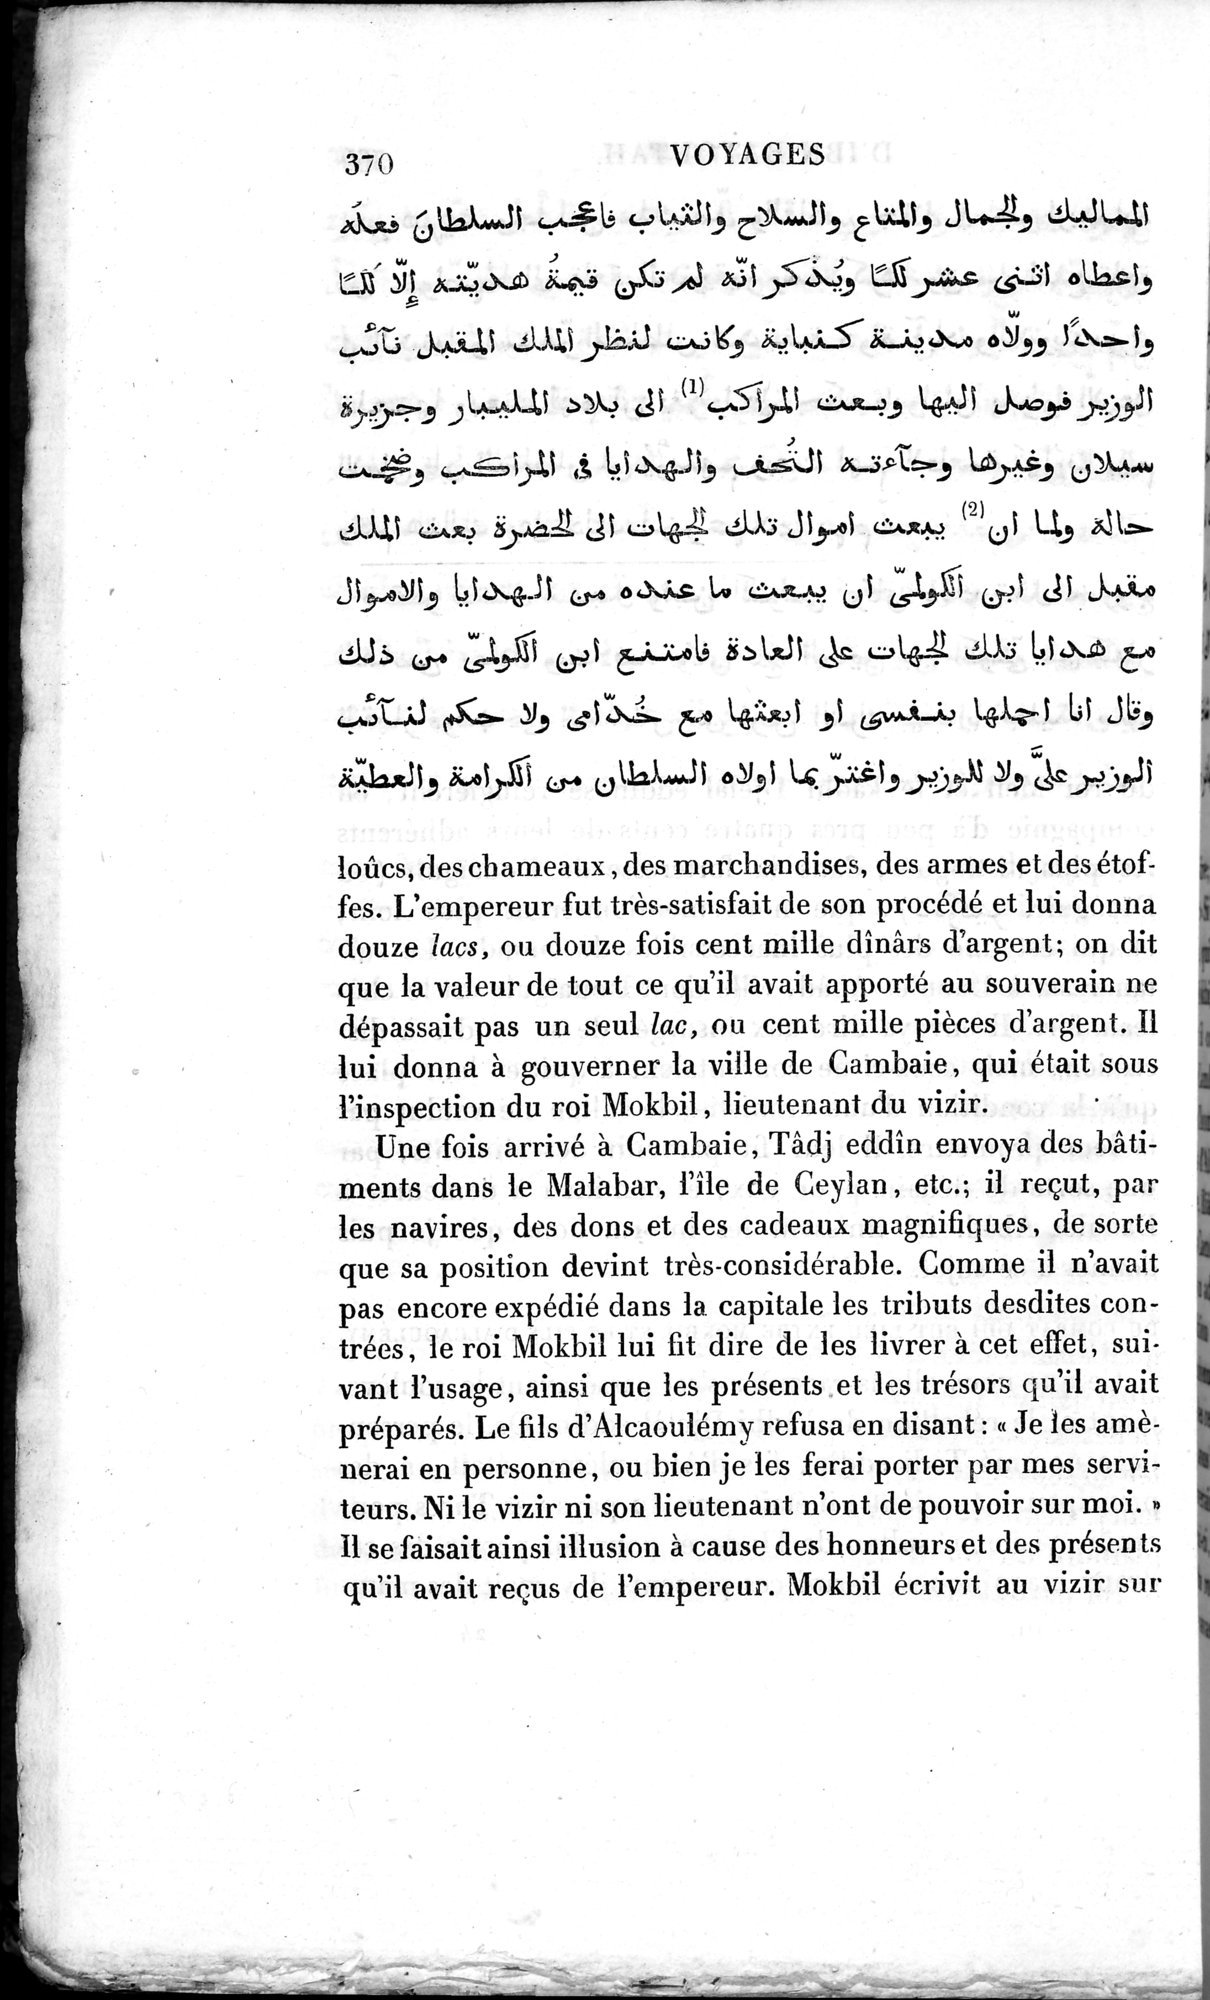 Voyages d'Ibn Batoutah : vol.3 / Page 410 (Grayscale High Resolution Image)